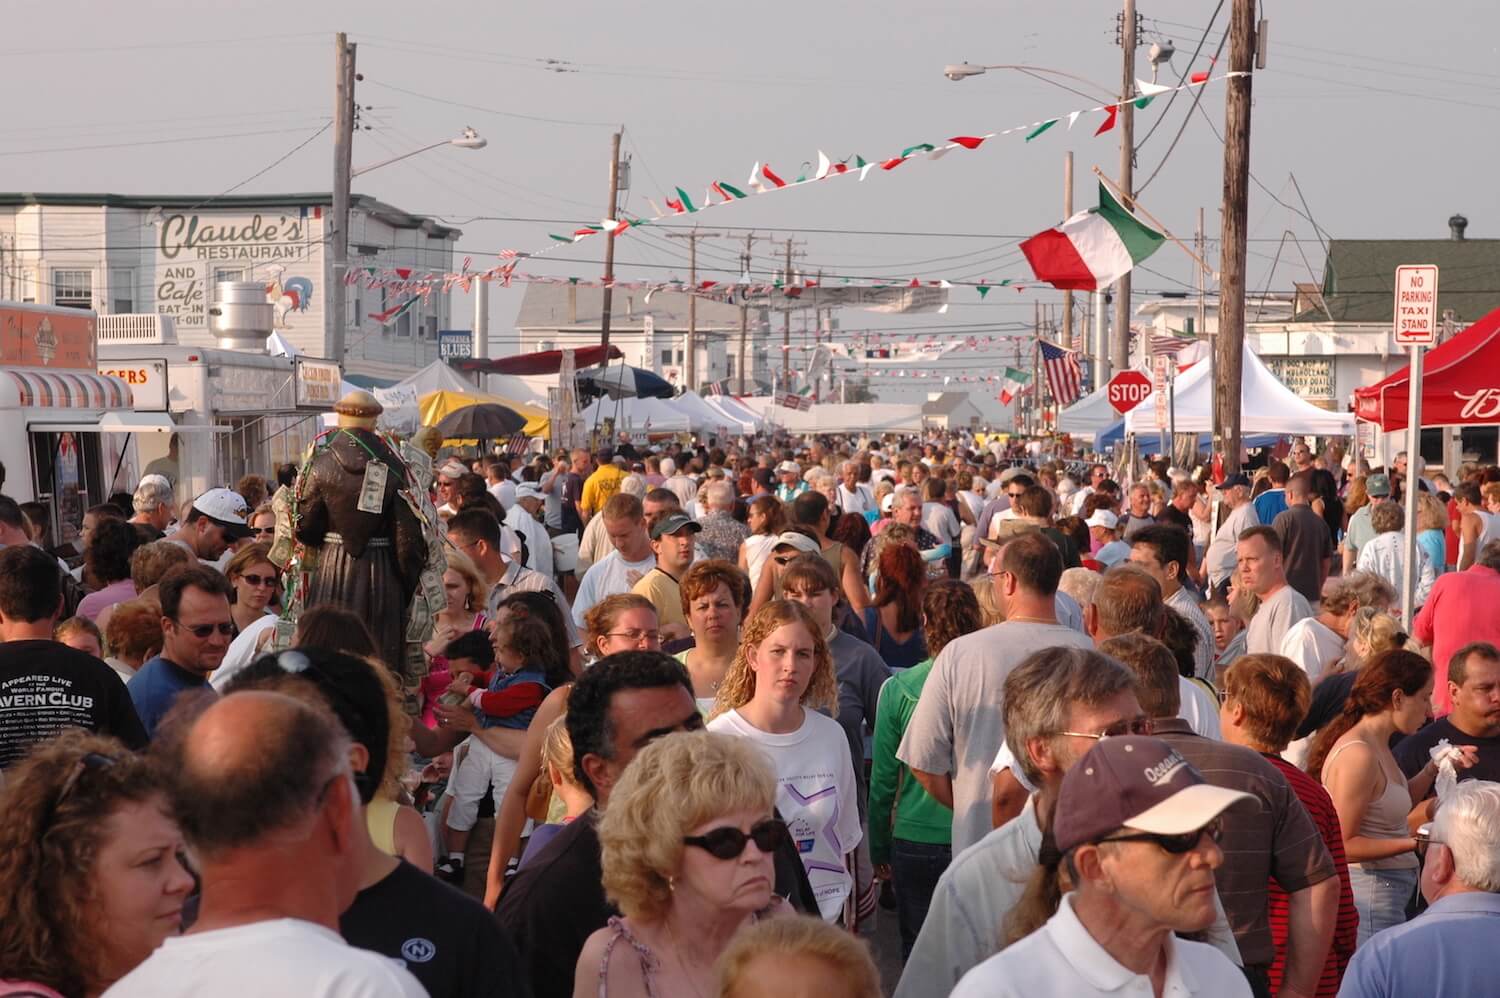 Lack of Volunteers Leads to Loss of Host for Italian-American Festival